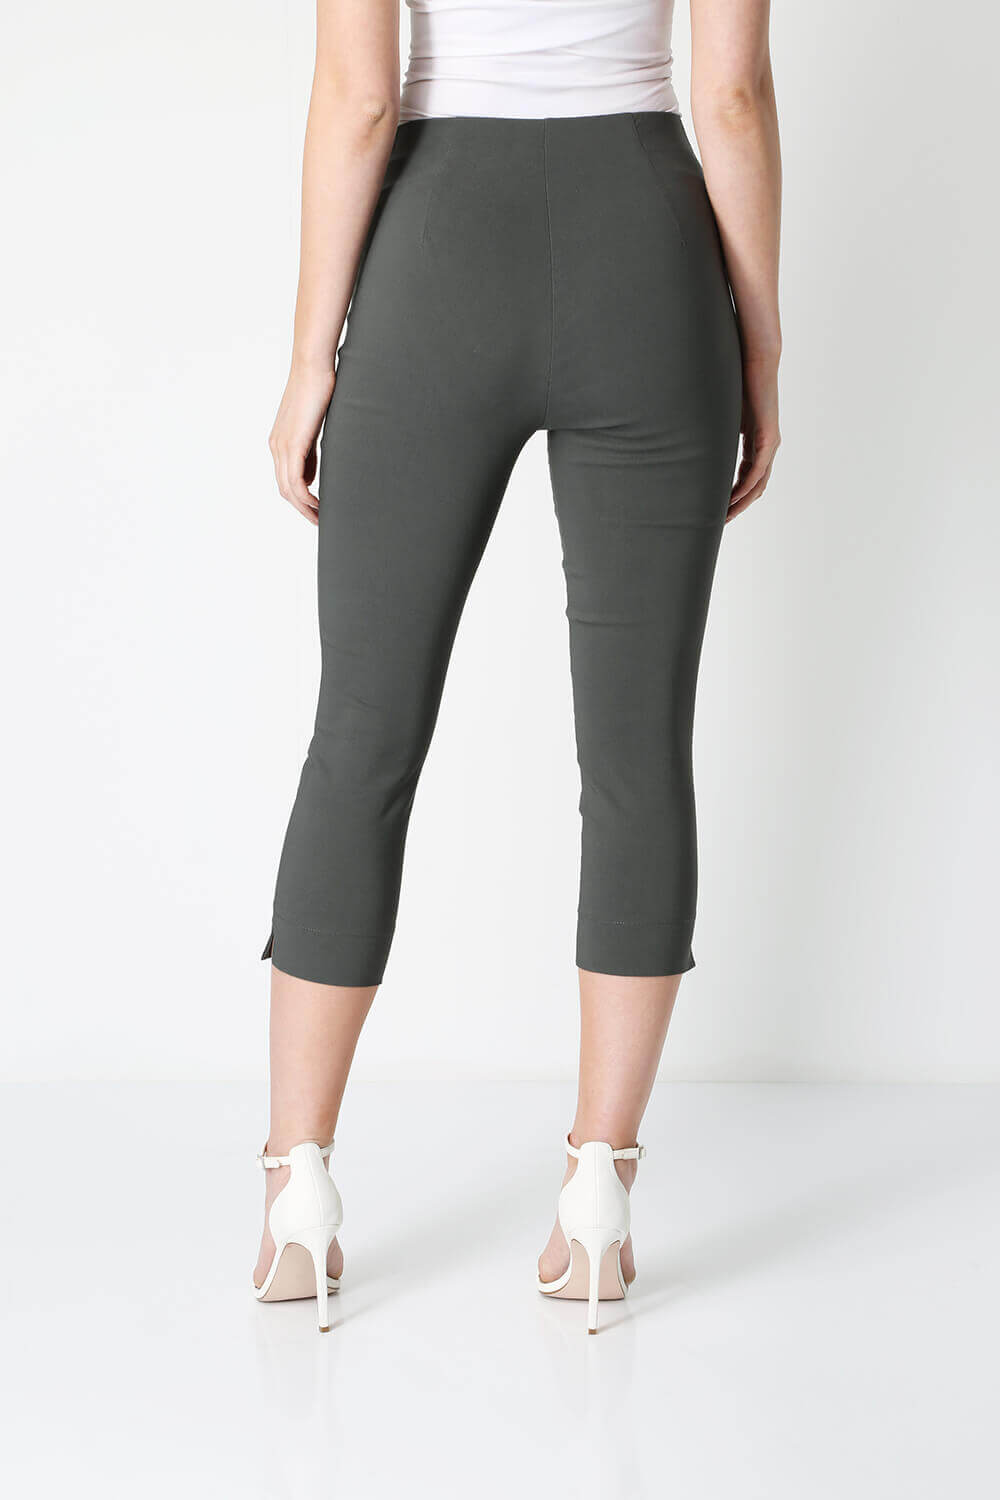 Forrest Cropped Stretch Trouser, Image 2 of 4